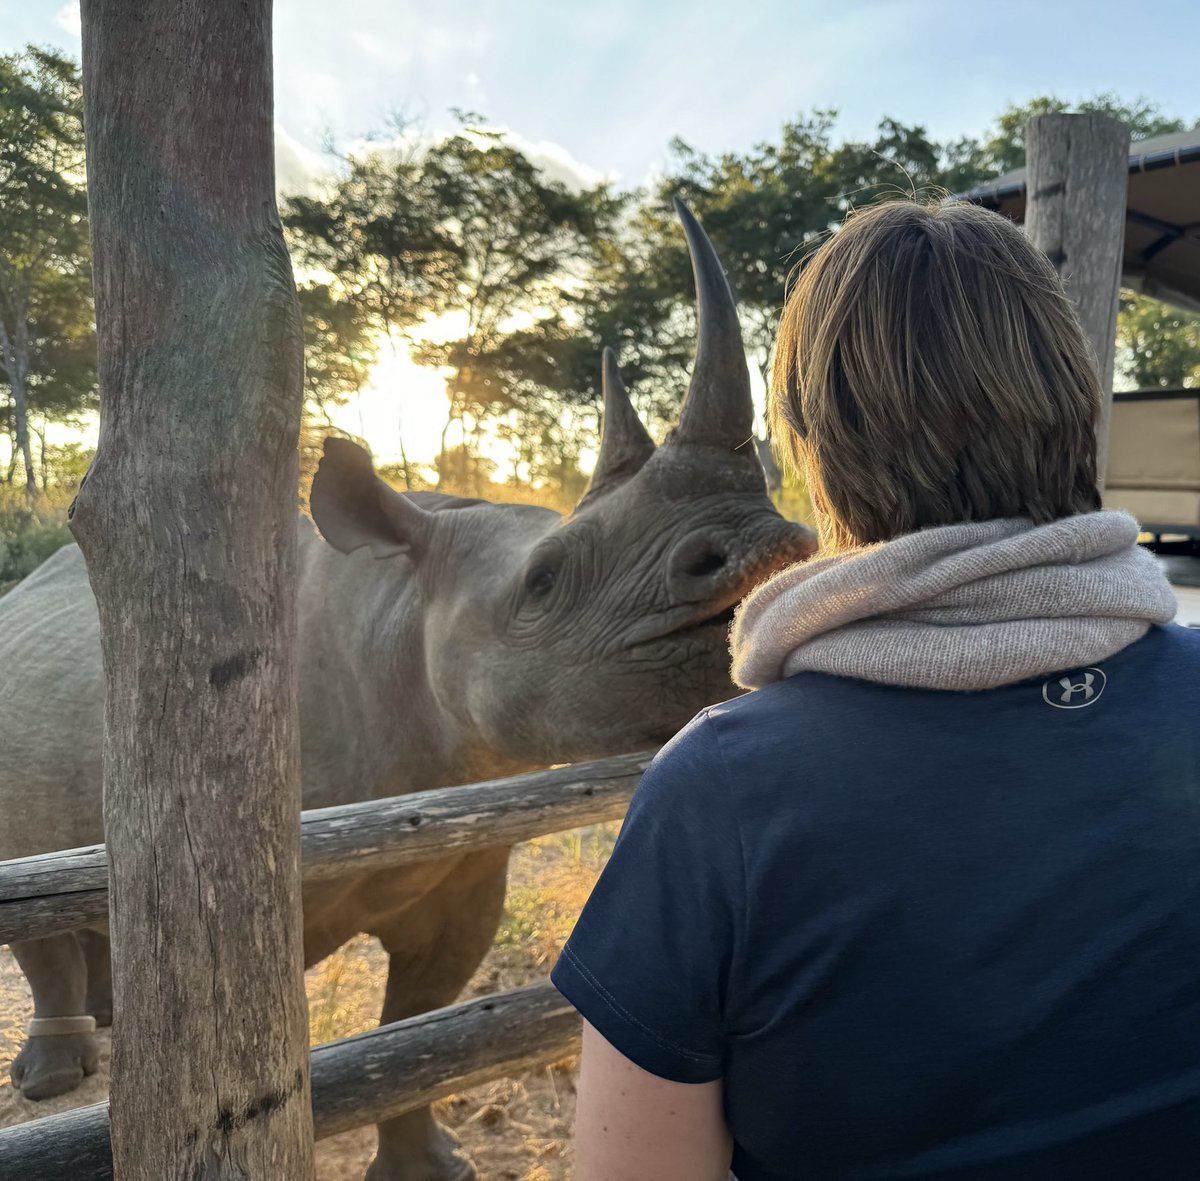 There’s nothing like getting up close & personal with a #rhino to remind one that, despite its many sorrows, it is still a beautiful world, & every vulnerable sentient being deserves to feel safe, free & cherished ❤️ ⁦@BornFreeFDN⁩ ⁦@manechance⁩ ⁦⁦⁦⁦